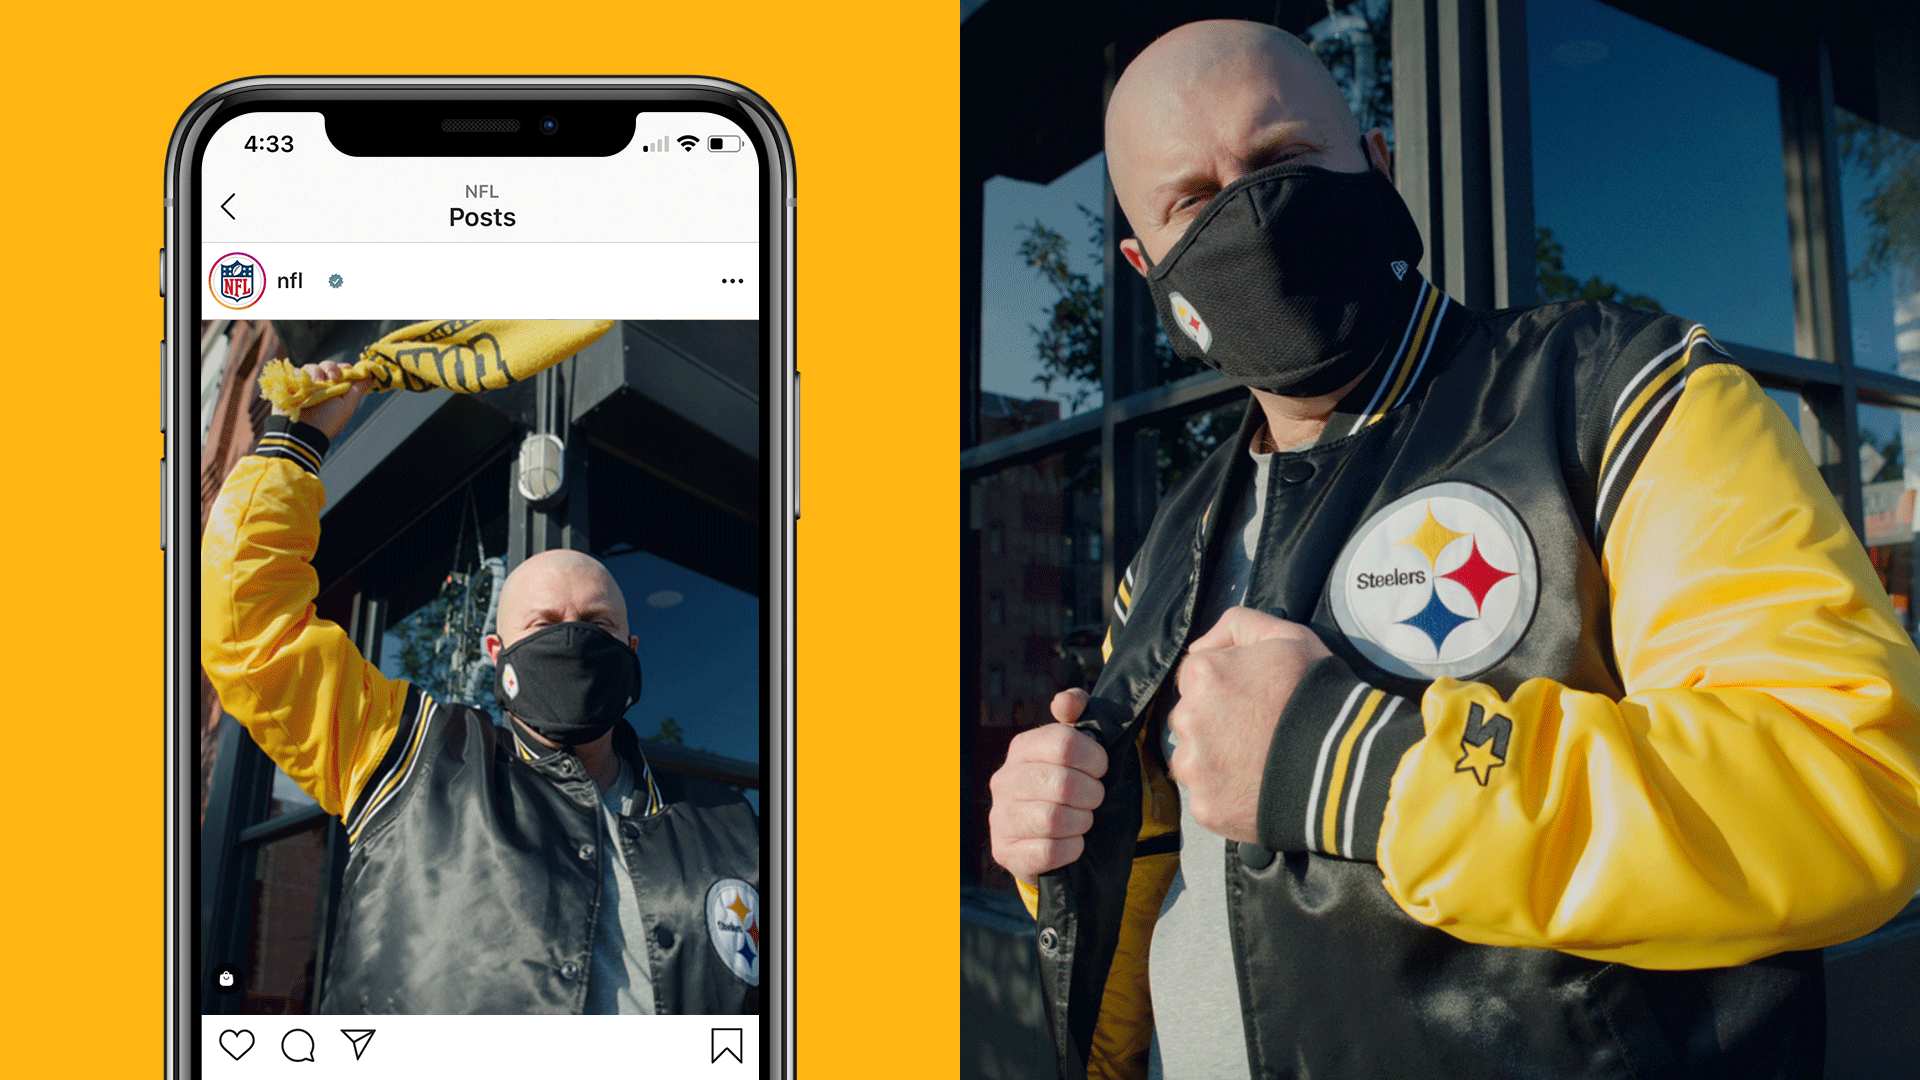 Steelers-gif-layout-shopping2